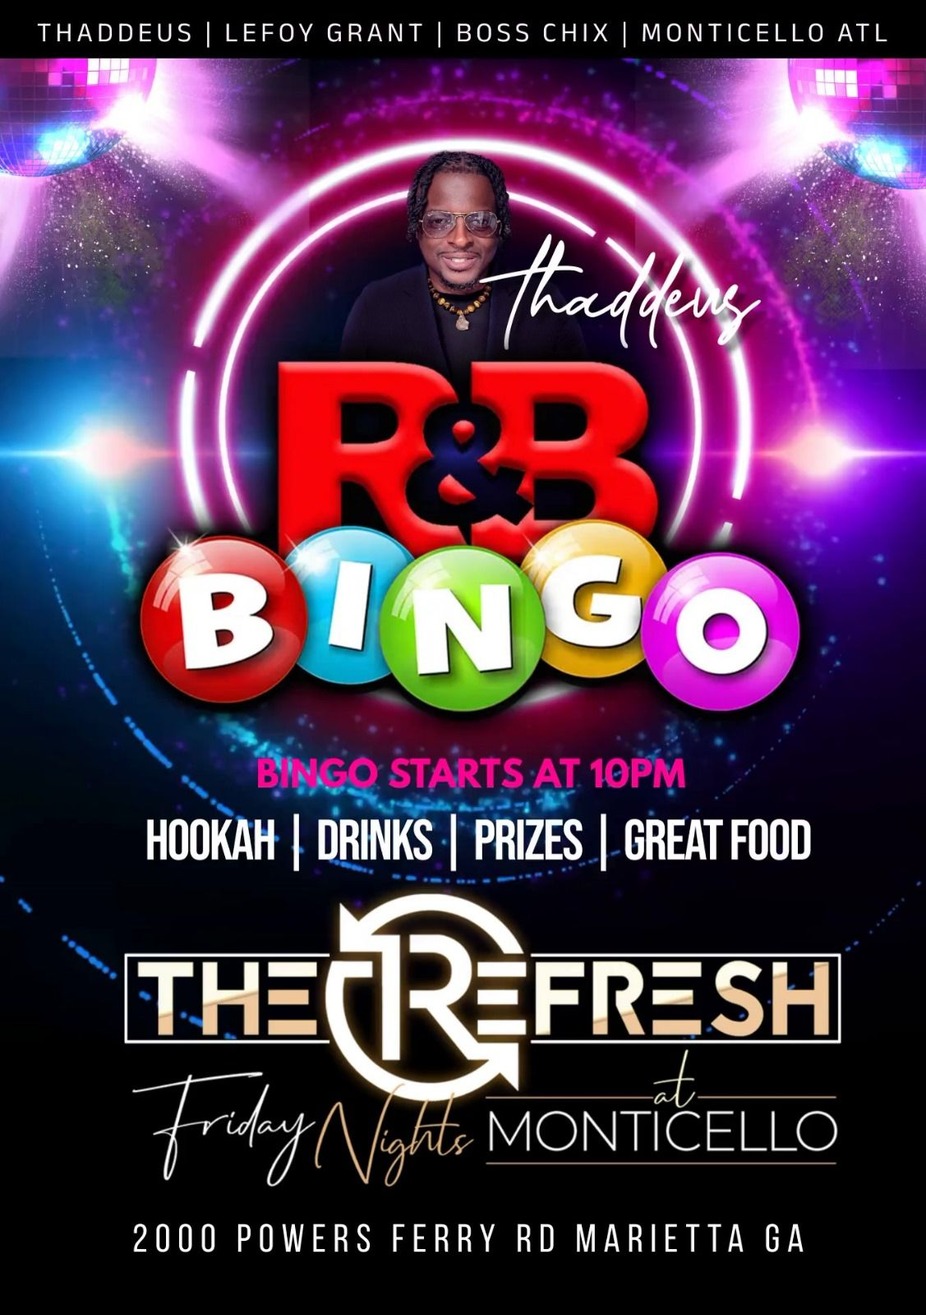 JOIN US IN MONTI'S FRONT LOUNGE FOR R&B BINGO! event photo